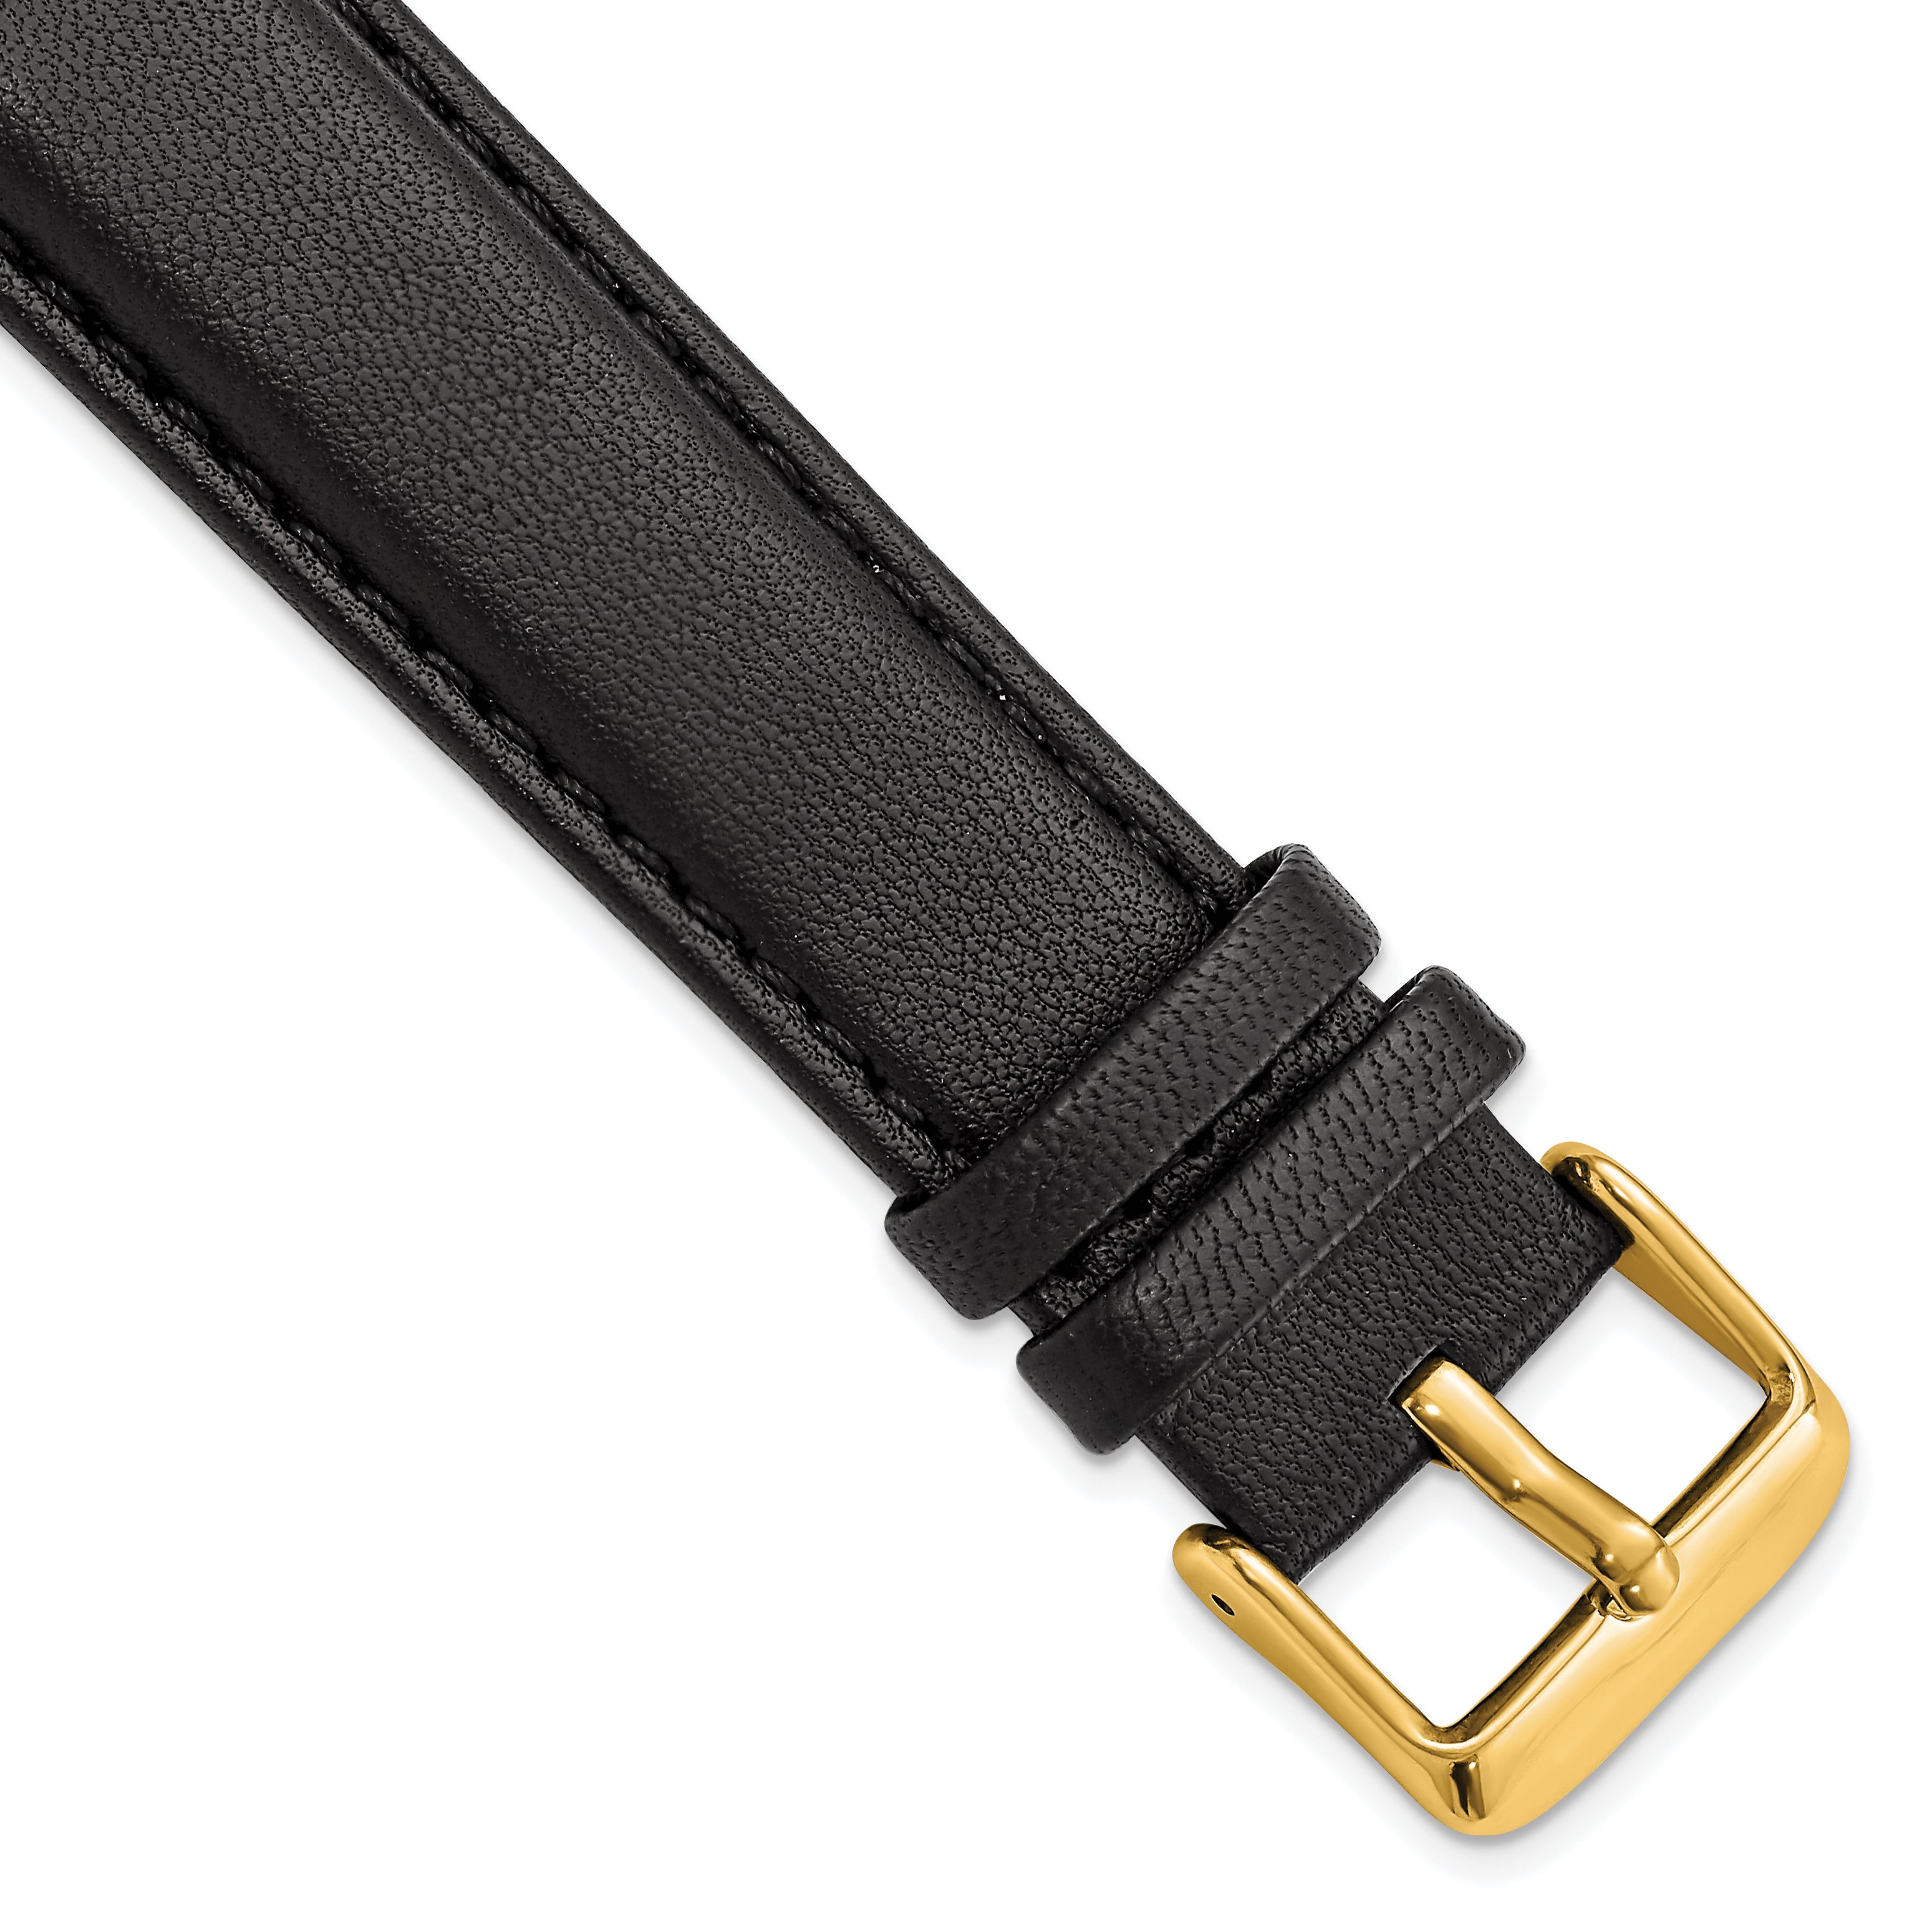 DeBeer 20mm Black Glove Leather with Gold-tone Panerai Style Buckle 7.75 inch Watch Band